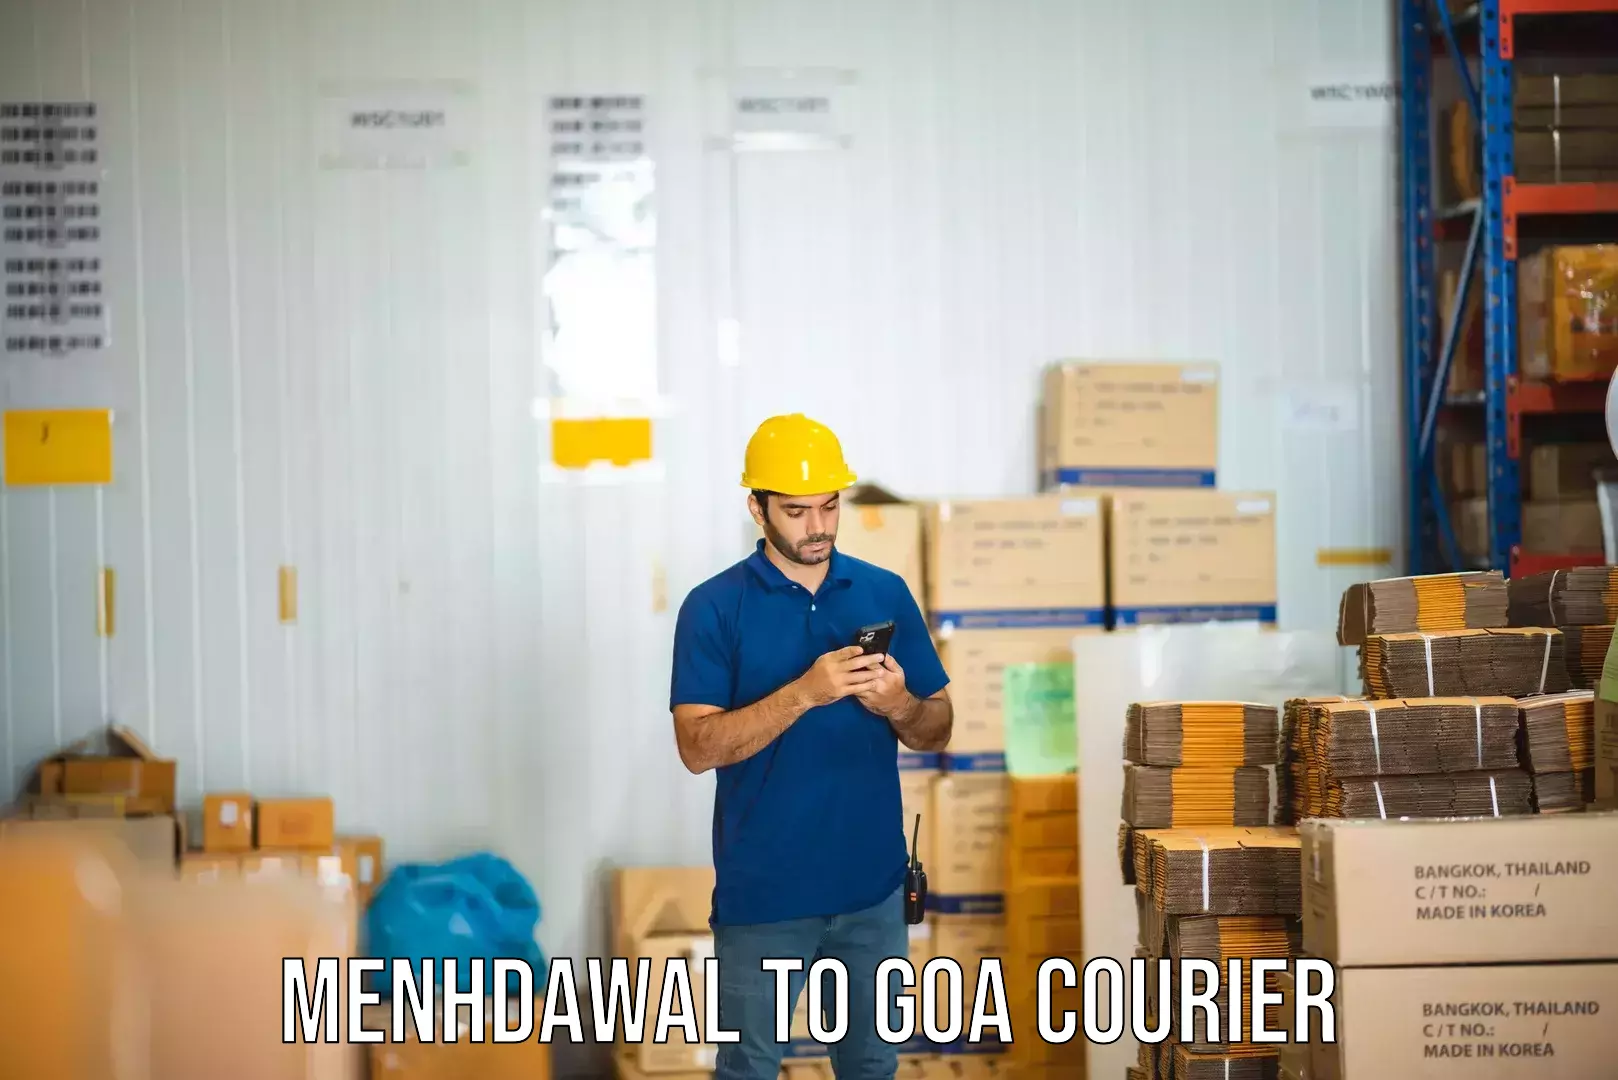 Express package services Menhdawal to Goa